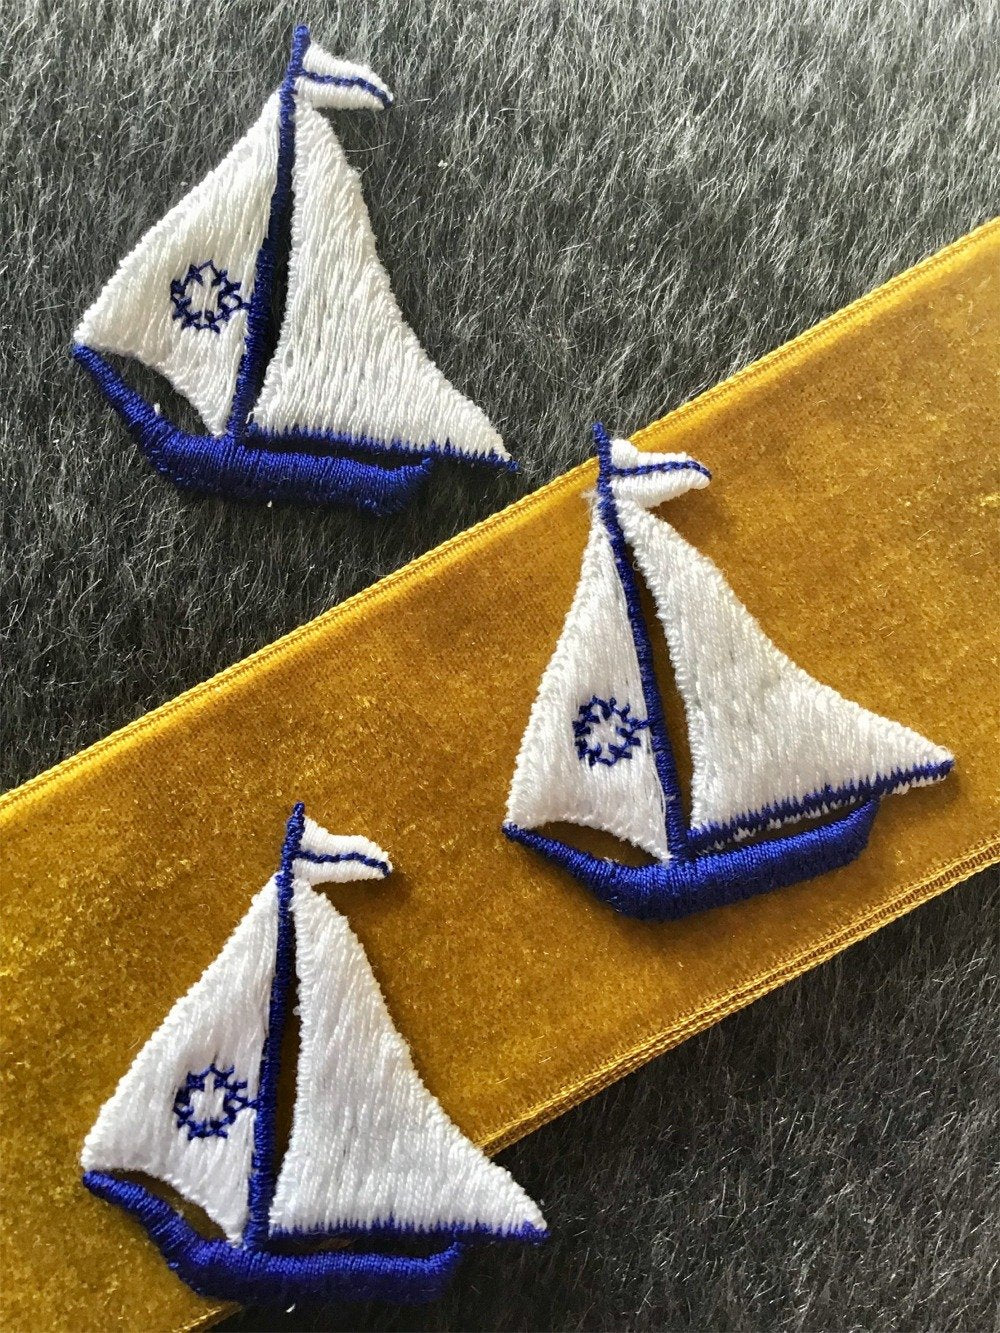 Vintage Embroidered Navy White Sailboat Sew-on Applique Patch #5014